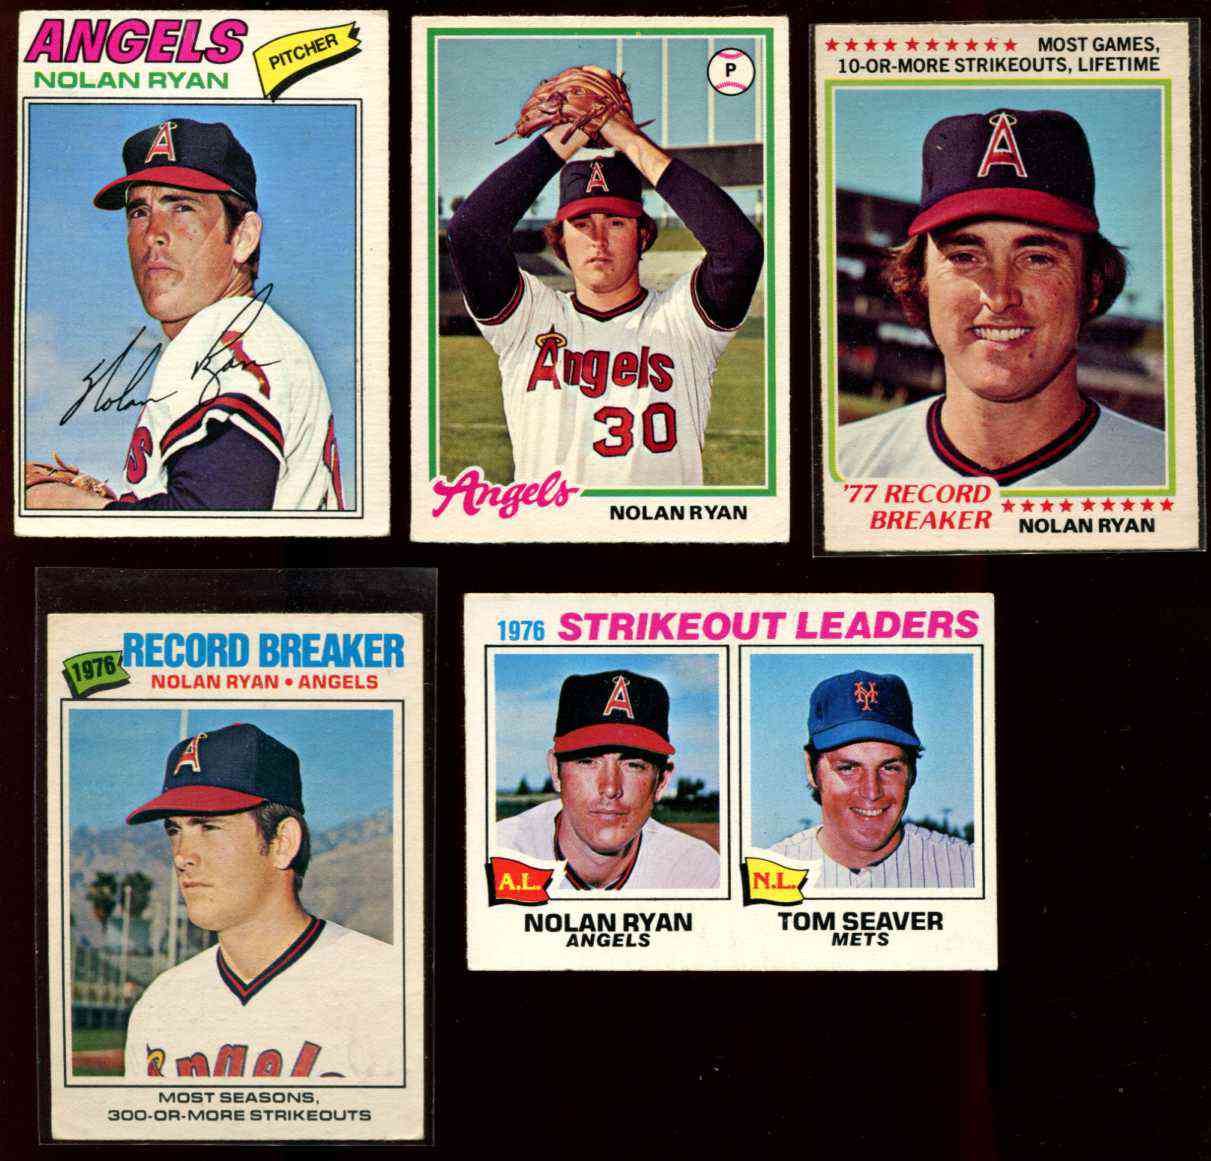 1978 O-Pee-Chee/OPC #241 Nolan Ryan RB 'Most Games 10 or More Strikeouts') Baseball cards value